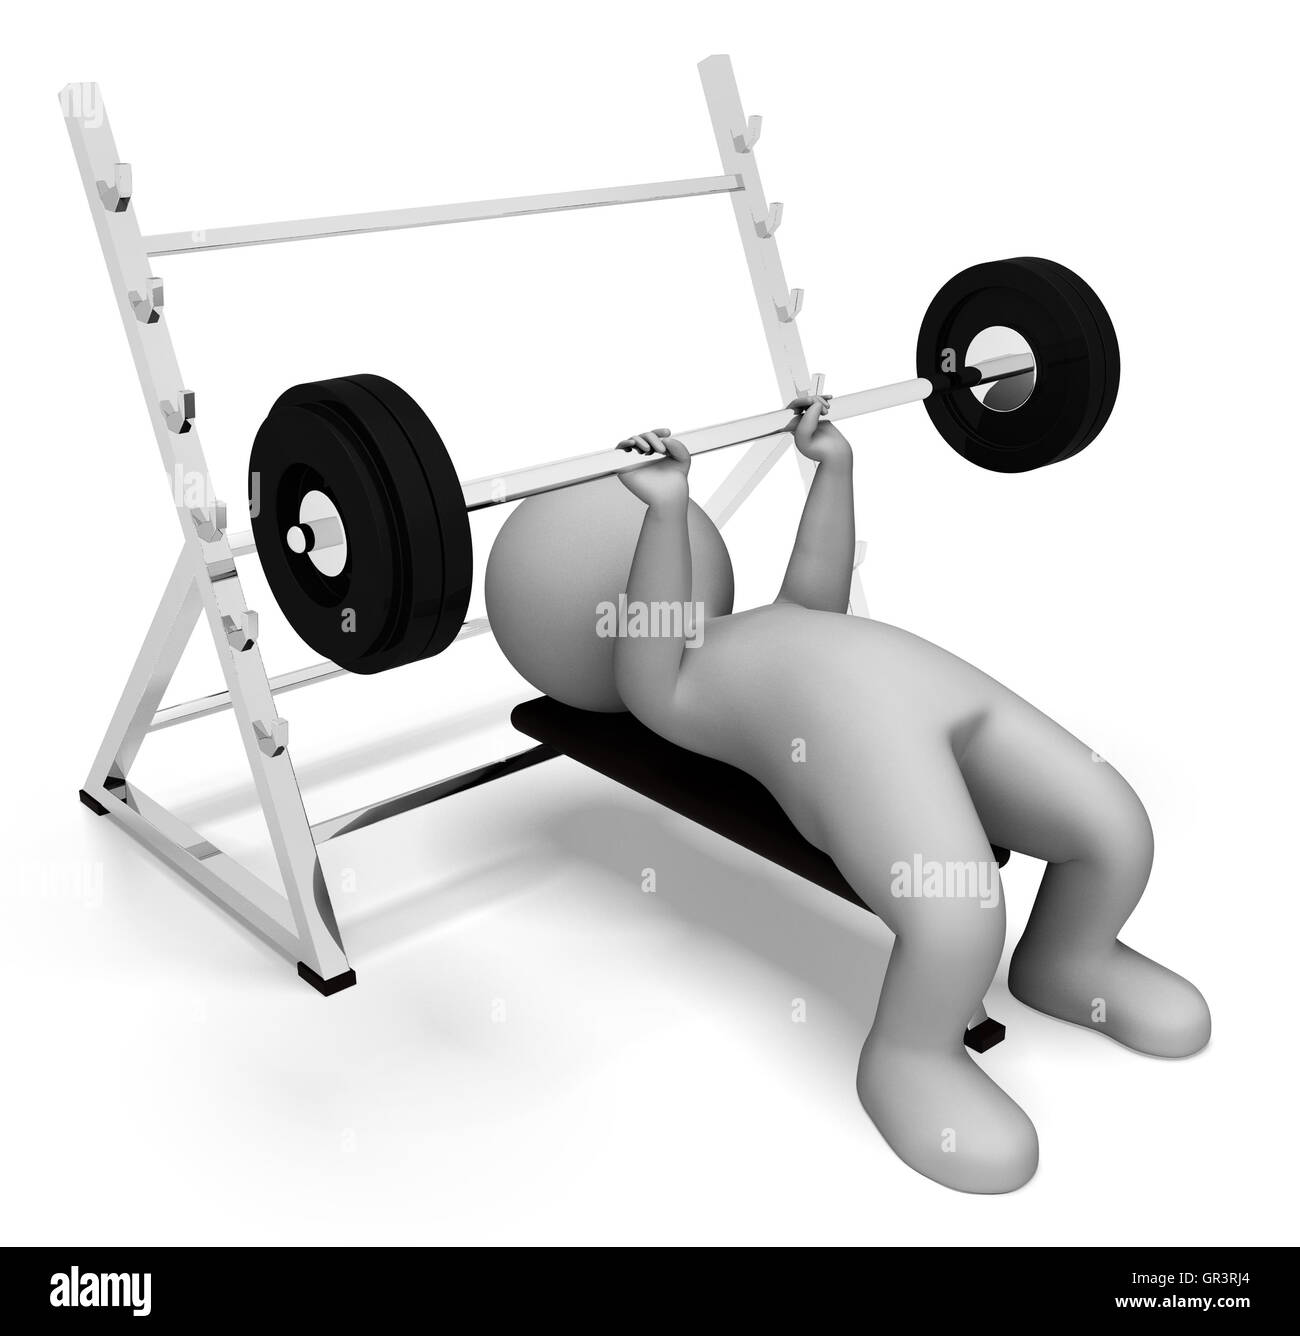 Weight Lifting Meaning Workout Equipment And Macho 3d Rendering Stock Photo